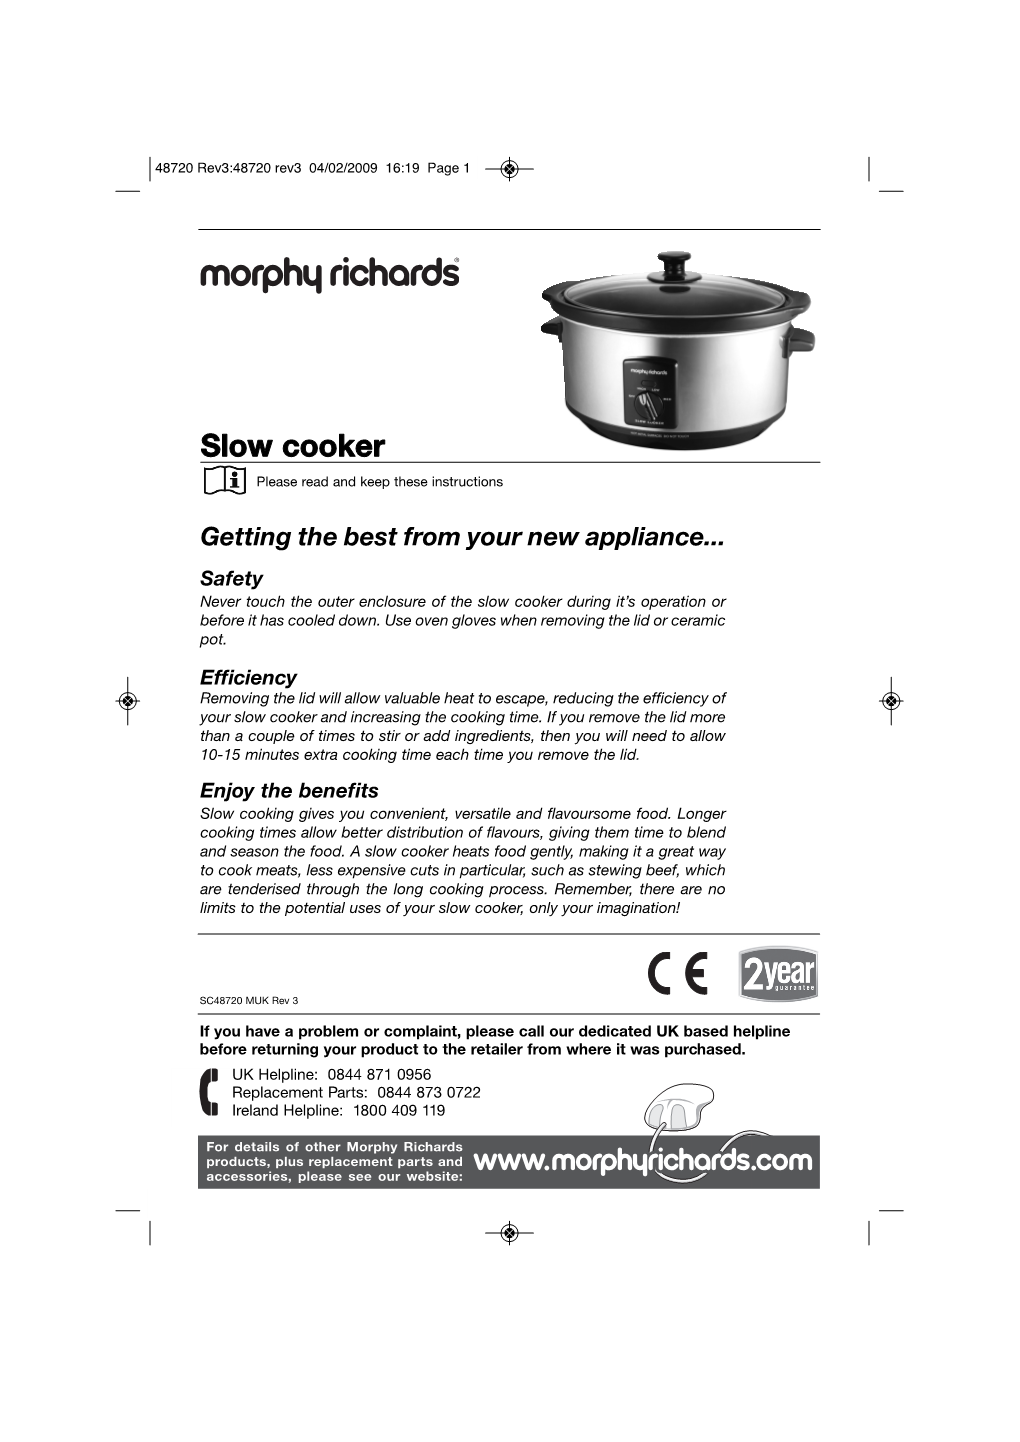 Slow Cooker Please Read and Keep These Instructions